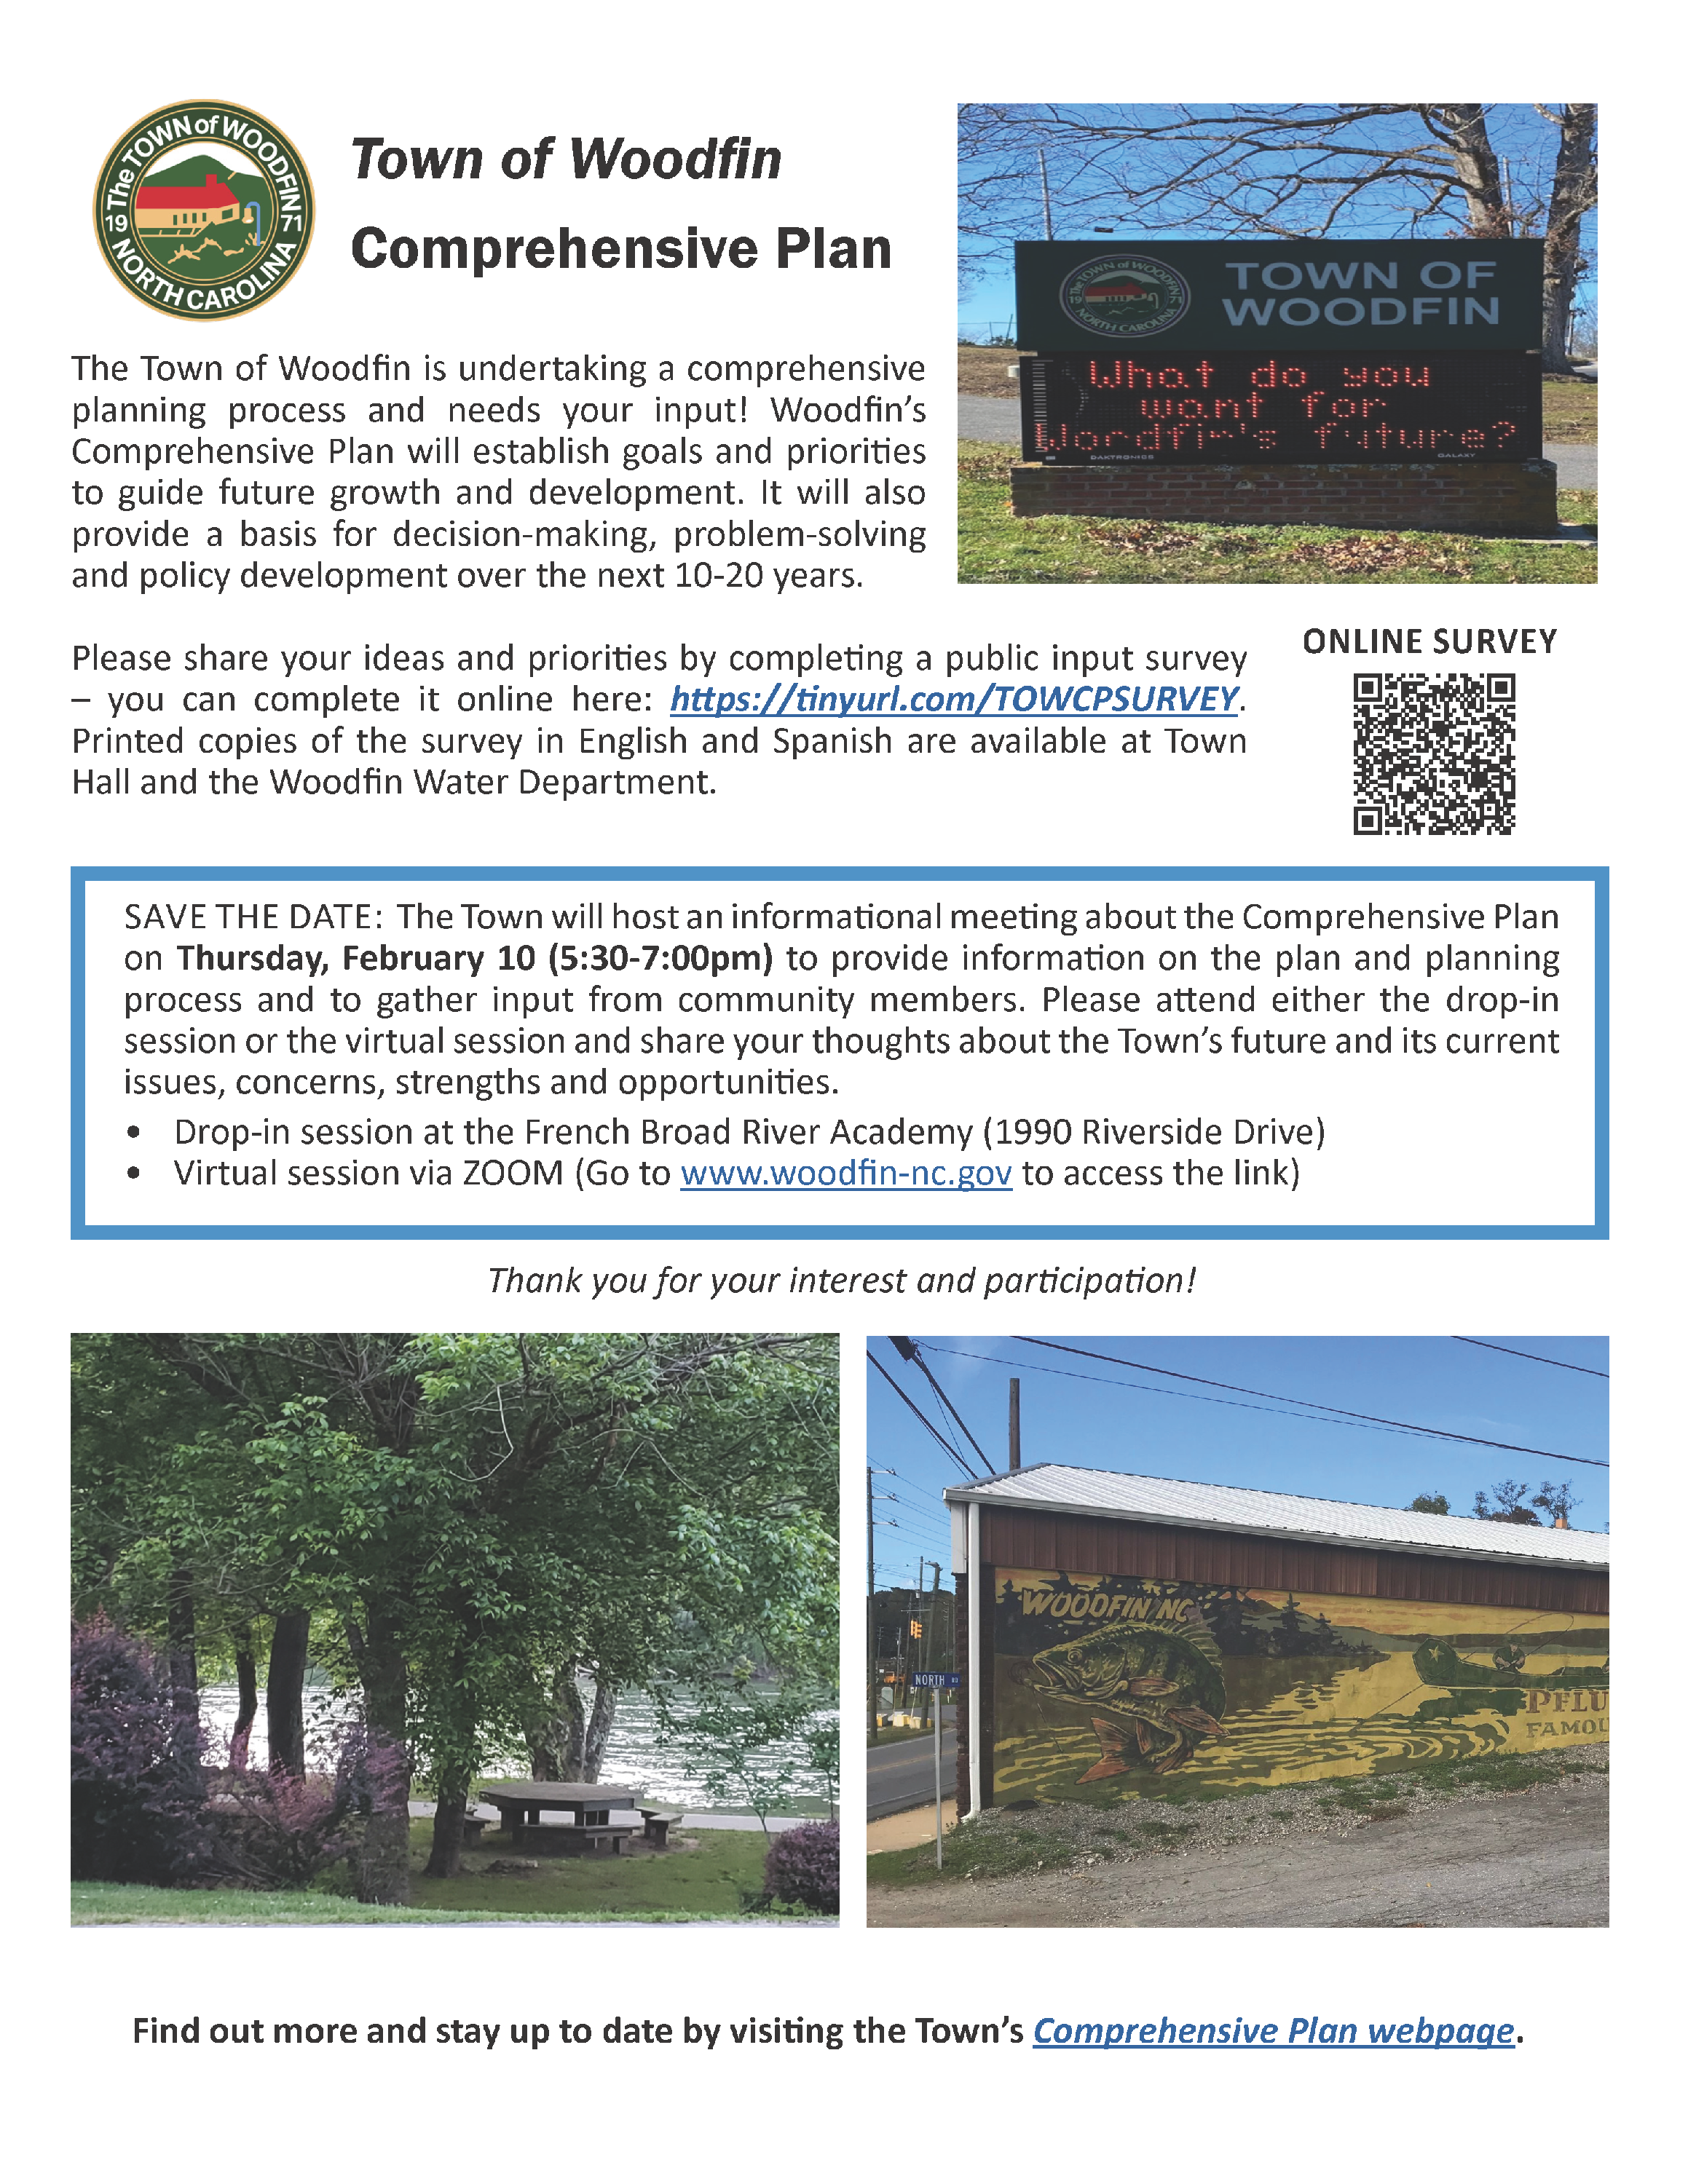 Woodfin Community Engagement Flyer_FINAL_2.1.22